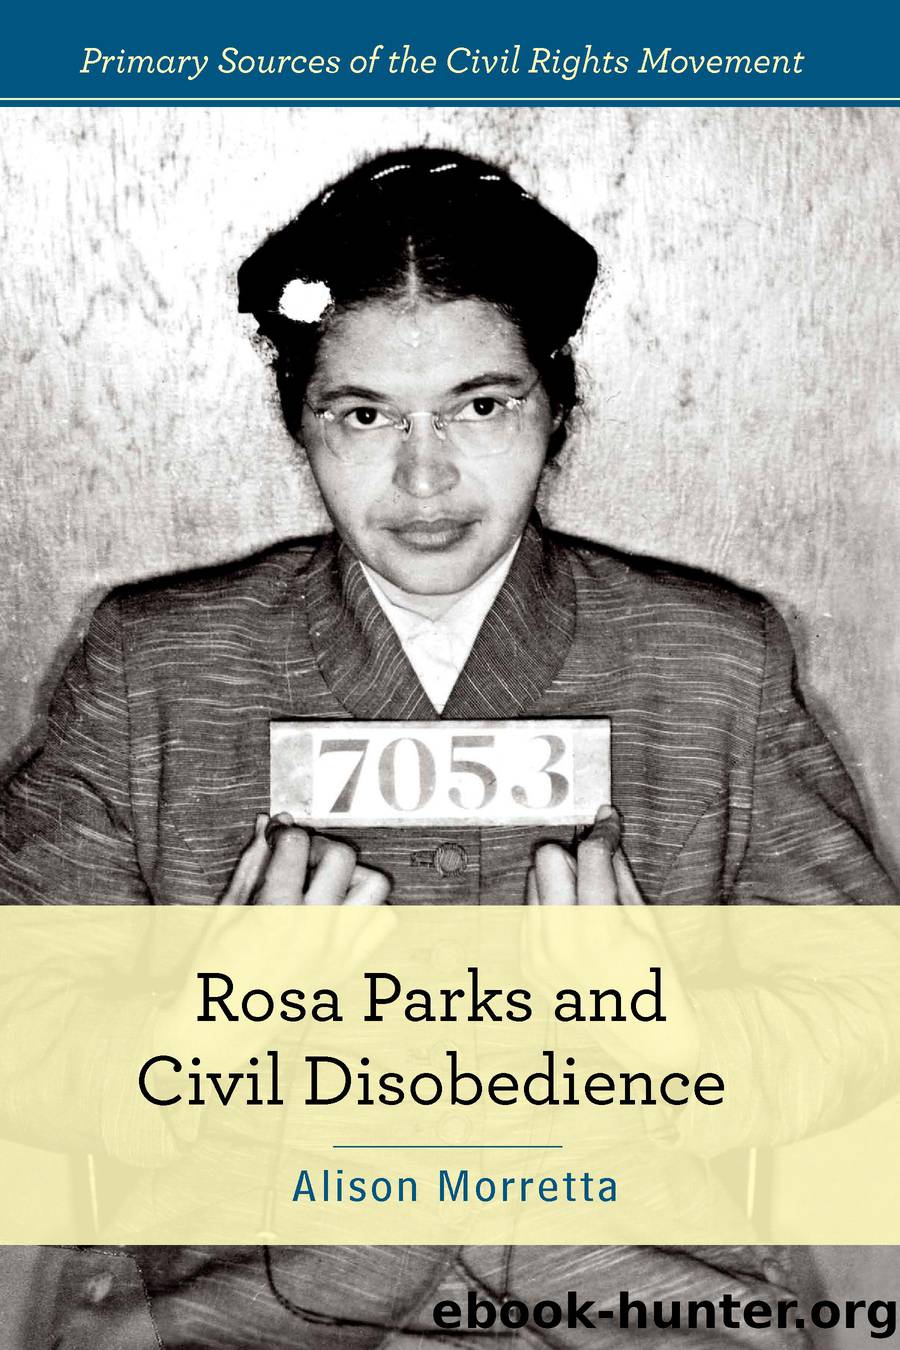 Rosa Parks and Civil Disobedience by Morretta Alison;